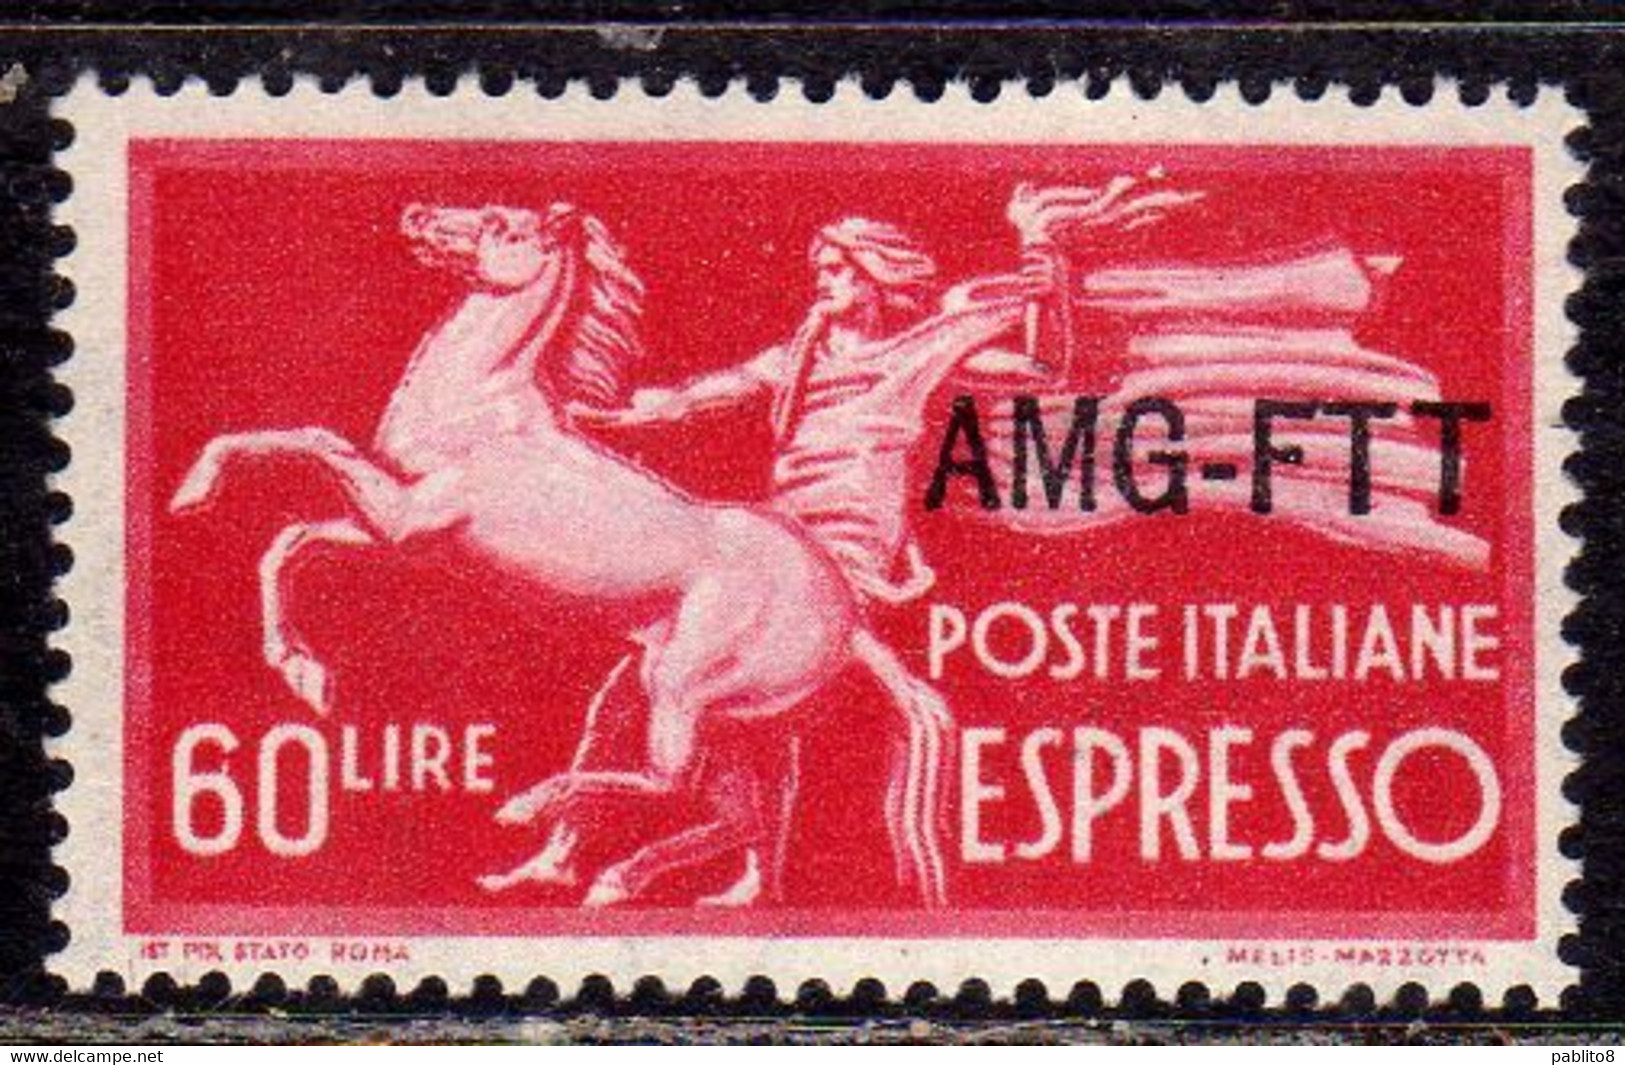 TRIESTE A 1950 AMG-FTT OVERPRINTED ESPRESSO SPECIAL DELIVERY LIRE 60 MNH BEN CENTRATO - Express Mail